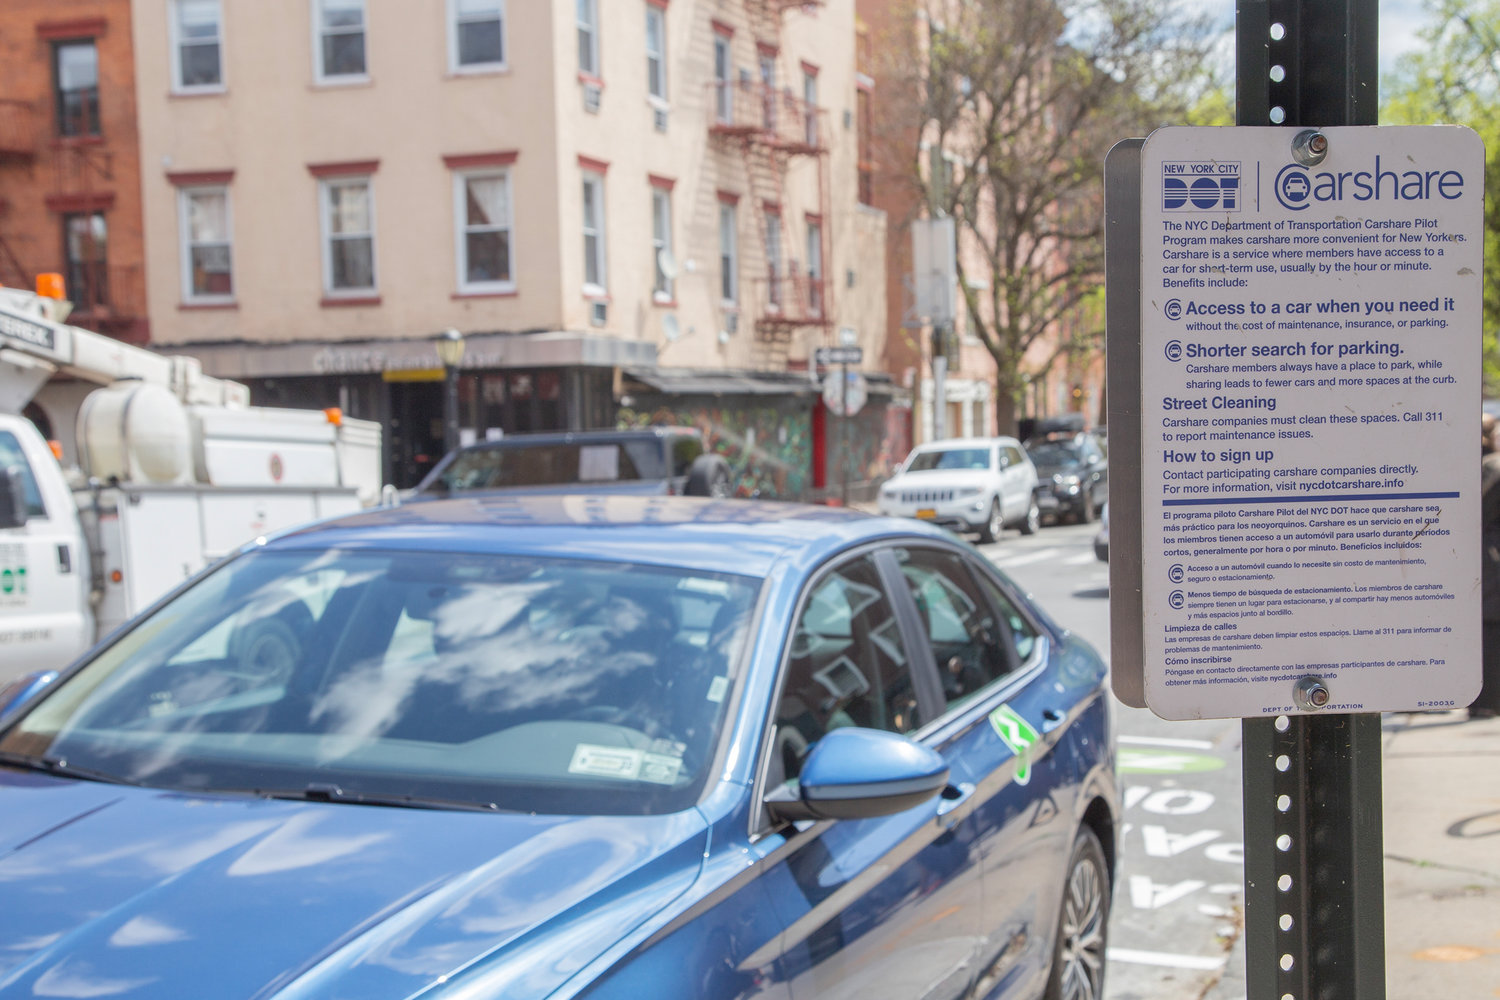 The city’s transportation department was due to attend the Community Board traffic and transportation committee on Nov. 17 to discuss the ride-sharing program that is coming to the Bronx.